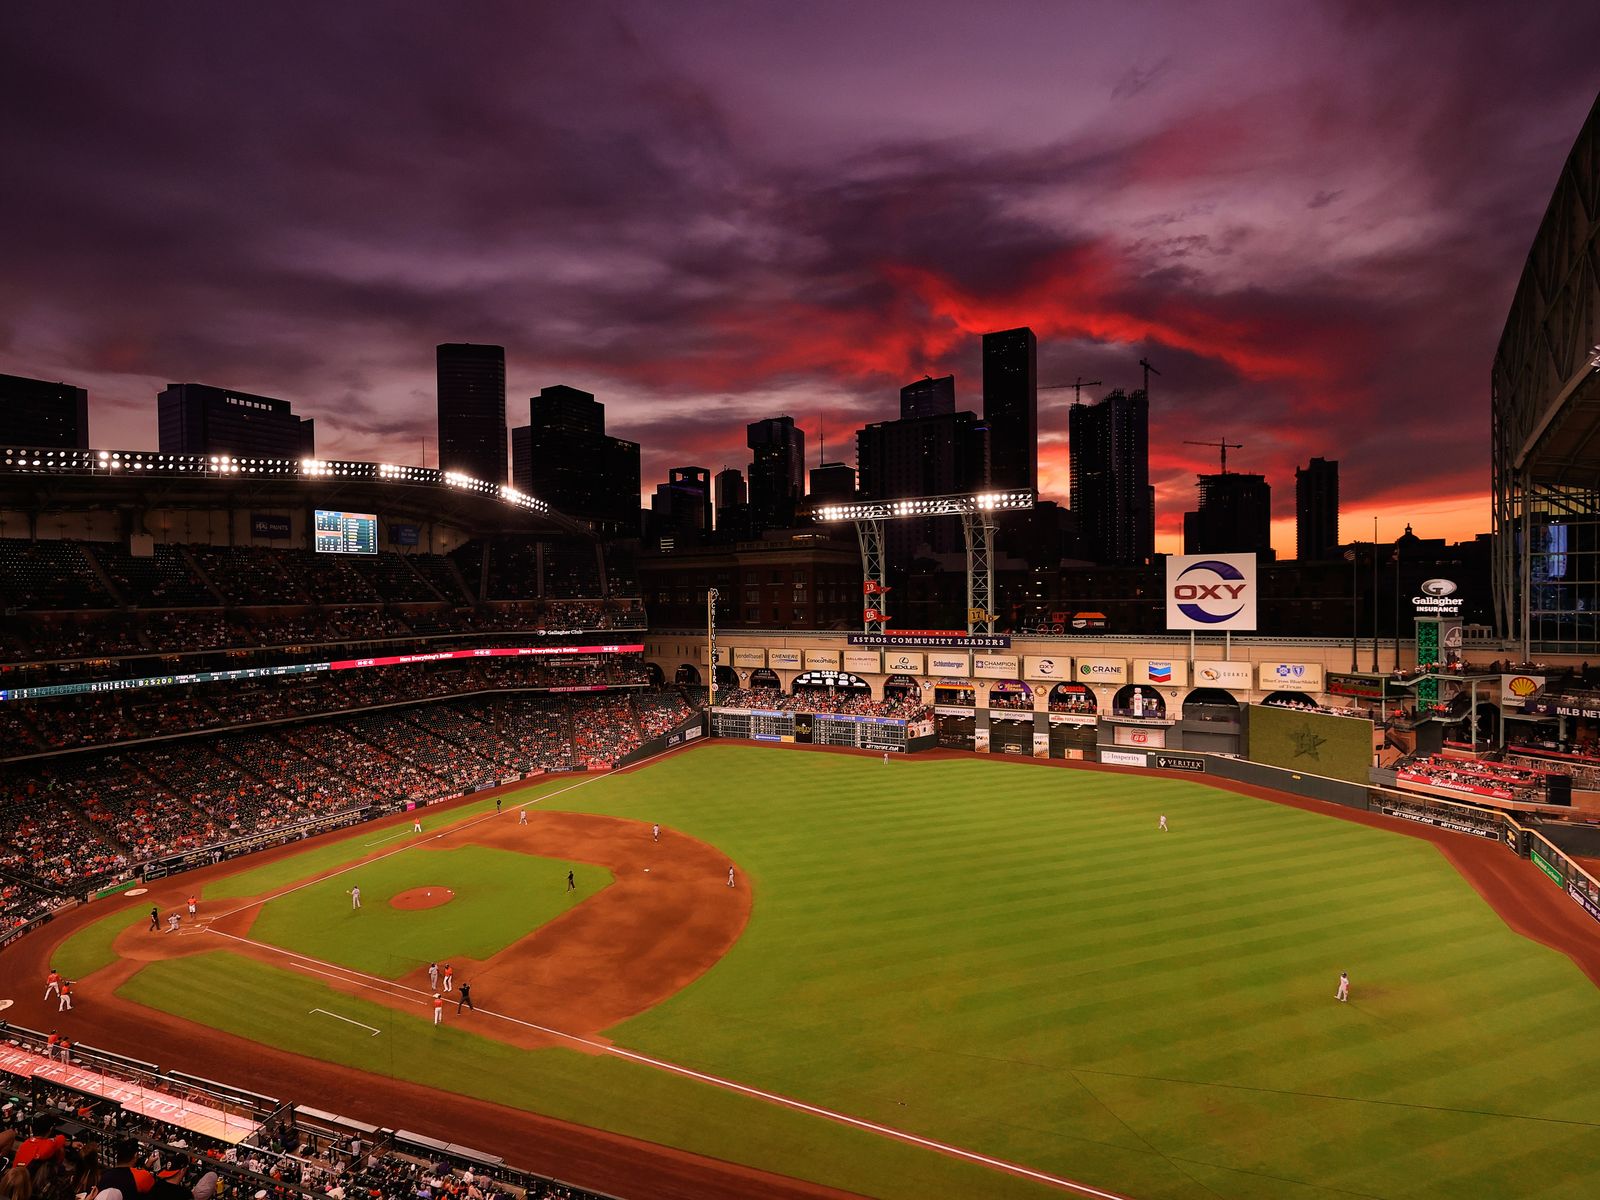 Houston Astros want the retractable roof at Minute Maid Park